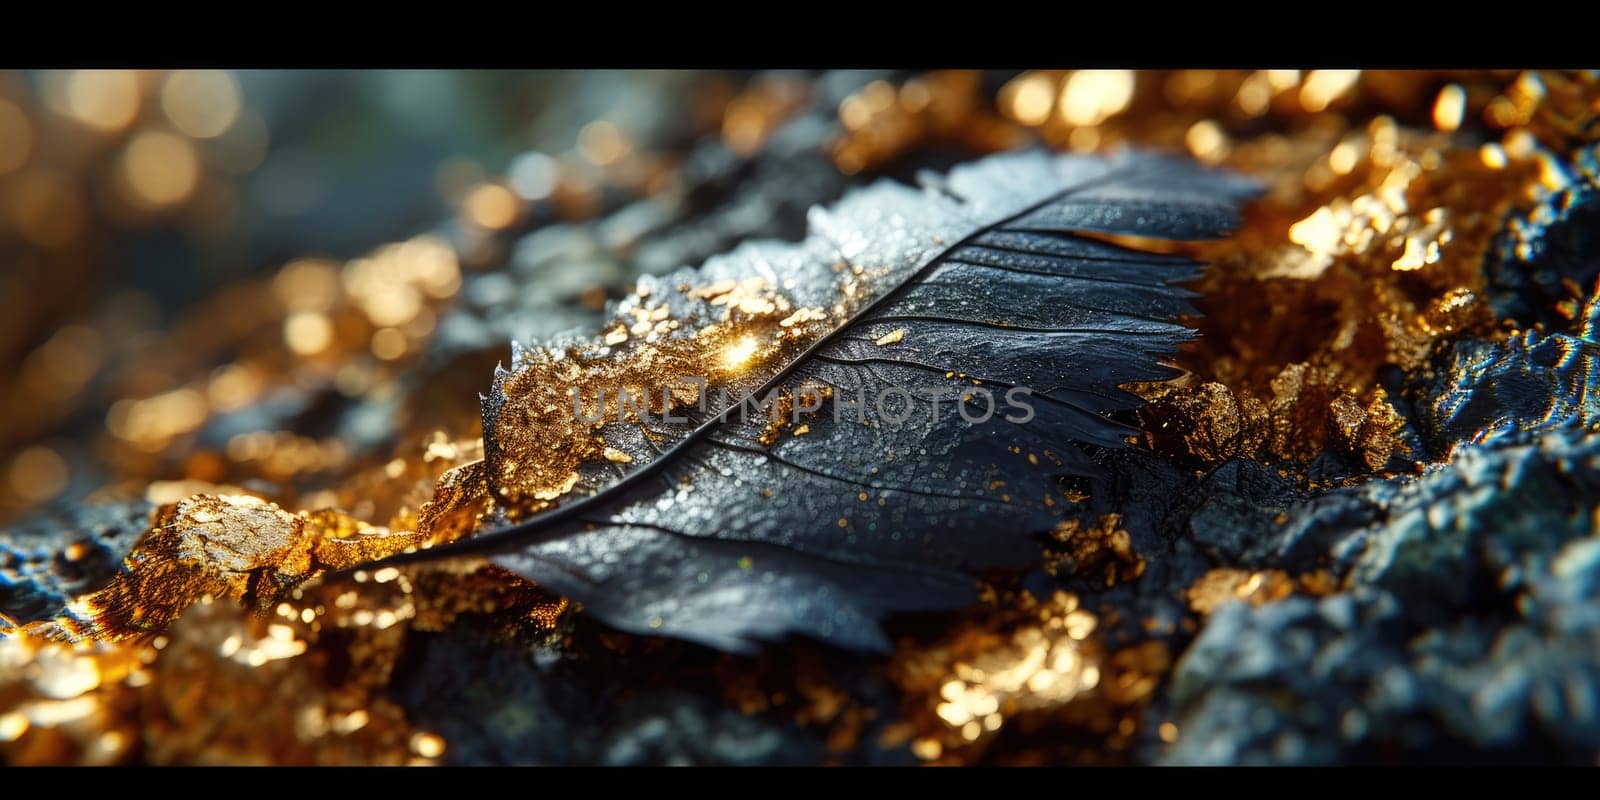 The picture of nature that focused to the gold leaf from tree in the forrest that stay on ground and got illuminated with the bright light of sunlight in the summer or spring time of the year. AIGX03.